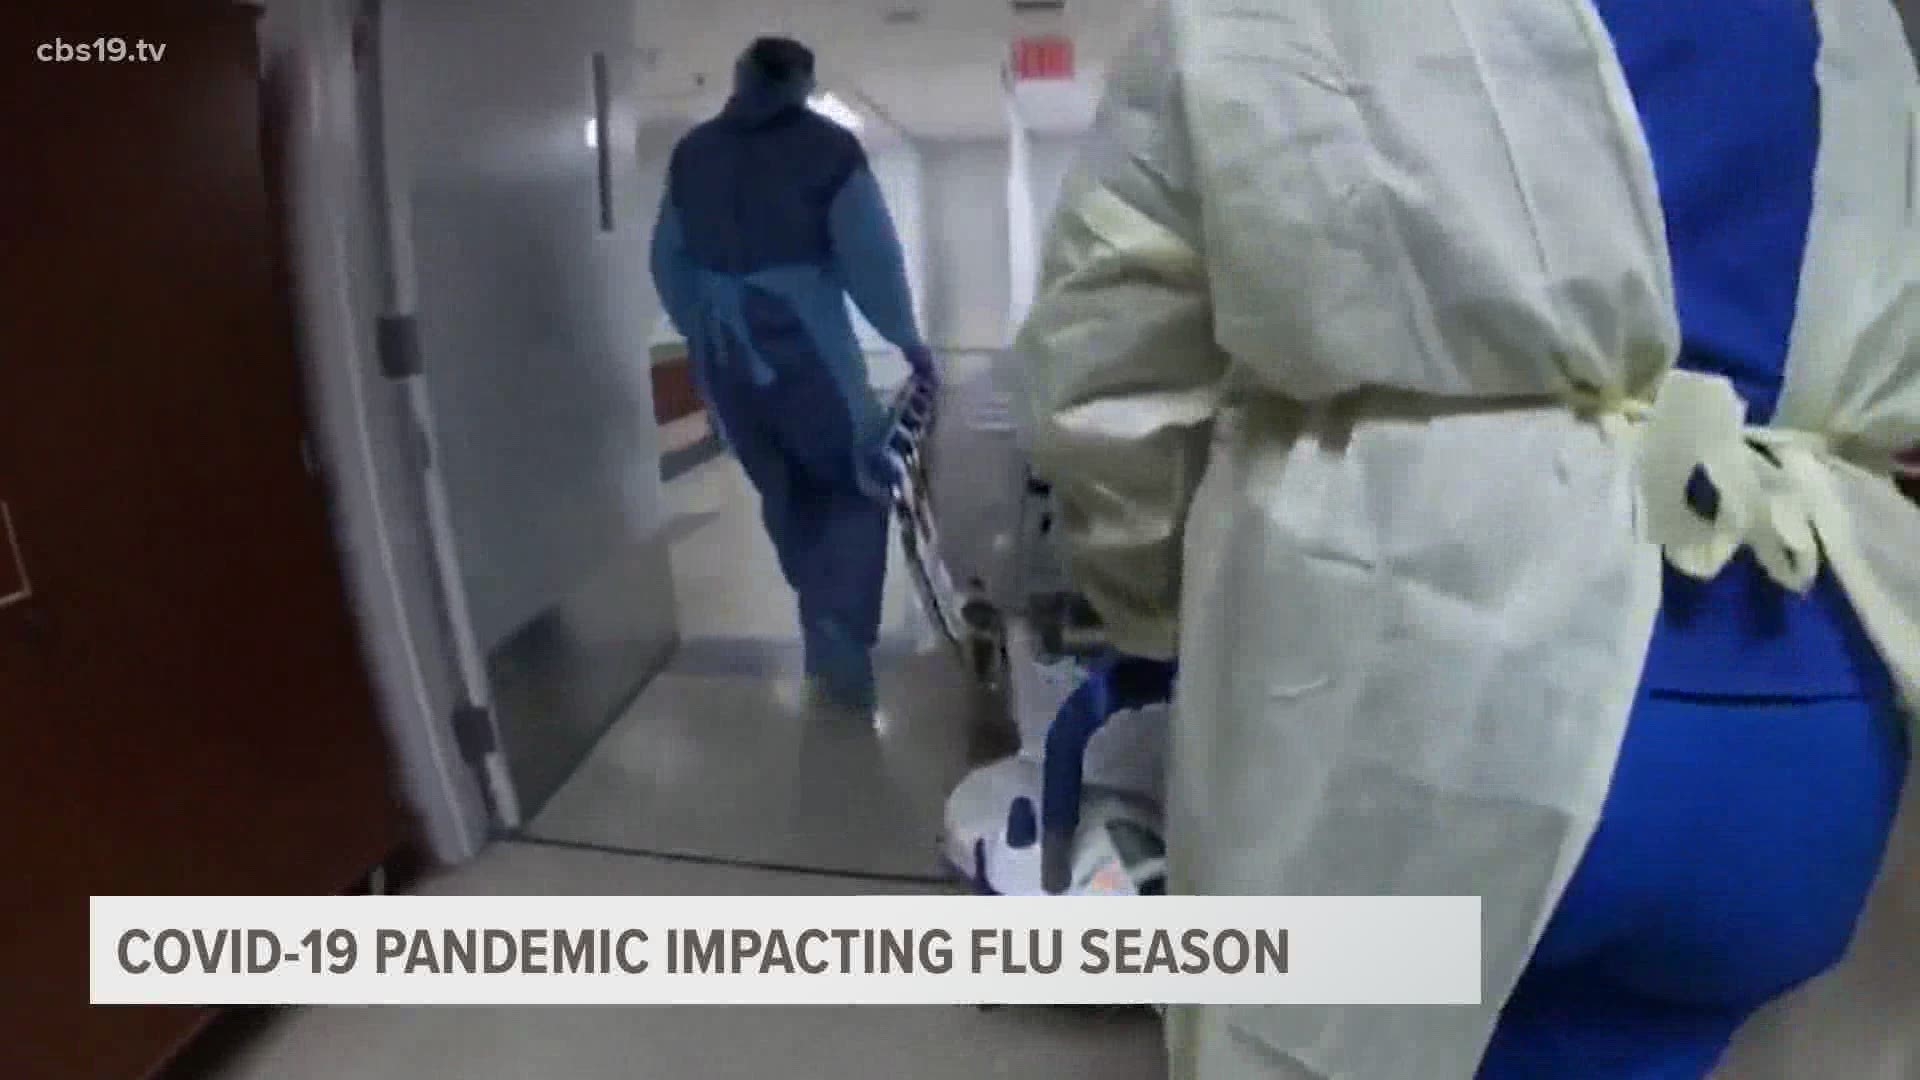 A local medical expert says flu, cold and COVID-19 symptoms often overlap.